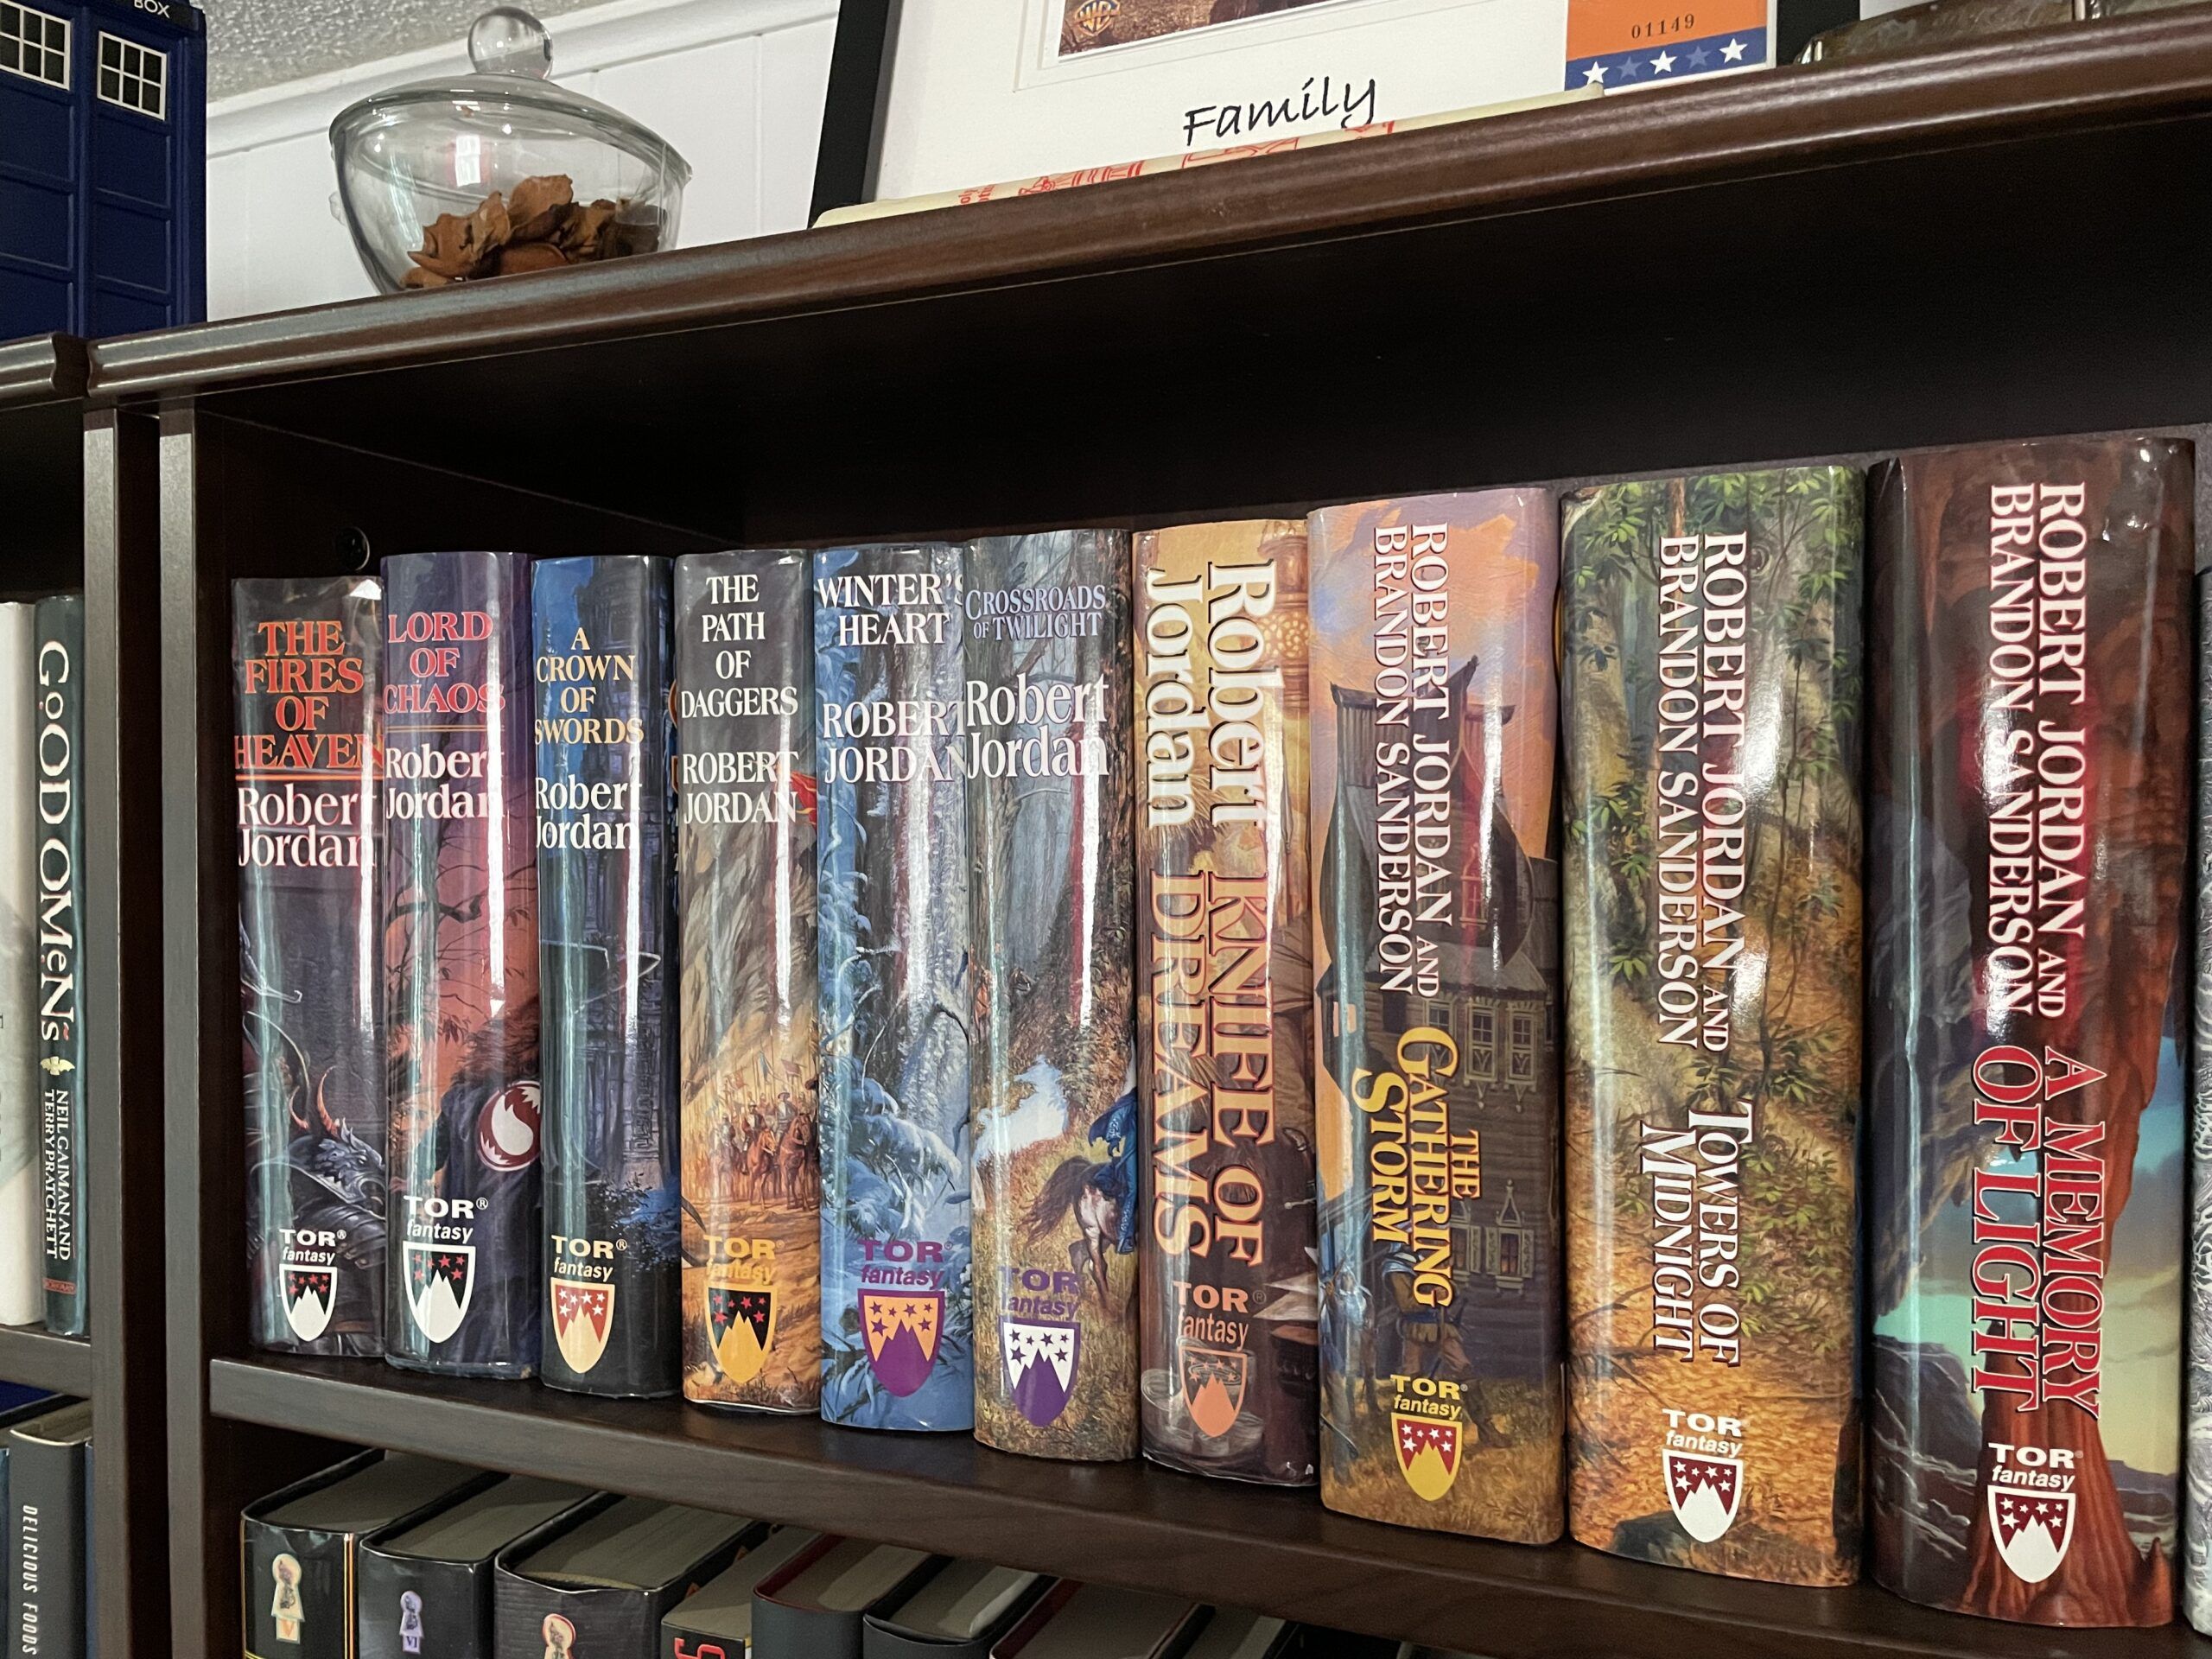 Why I Gave Up Reading The Wheel of Time